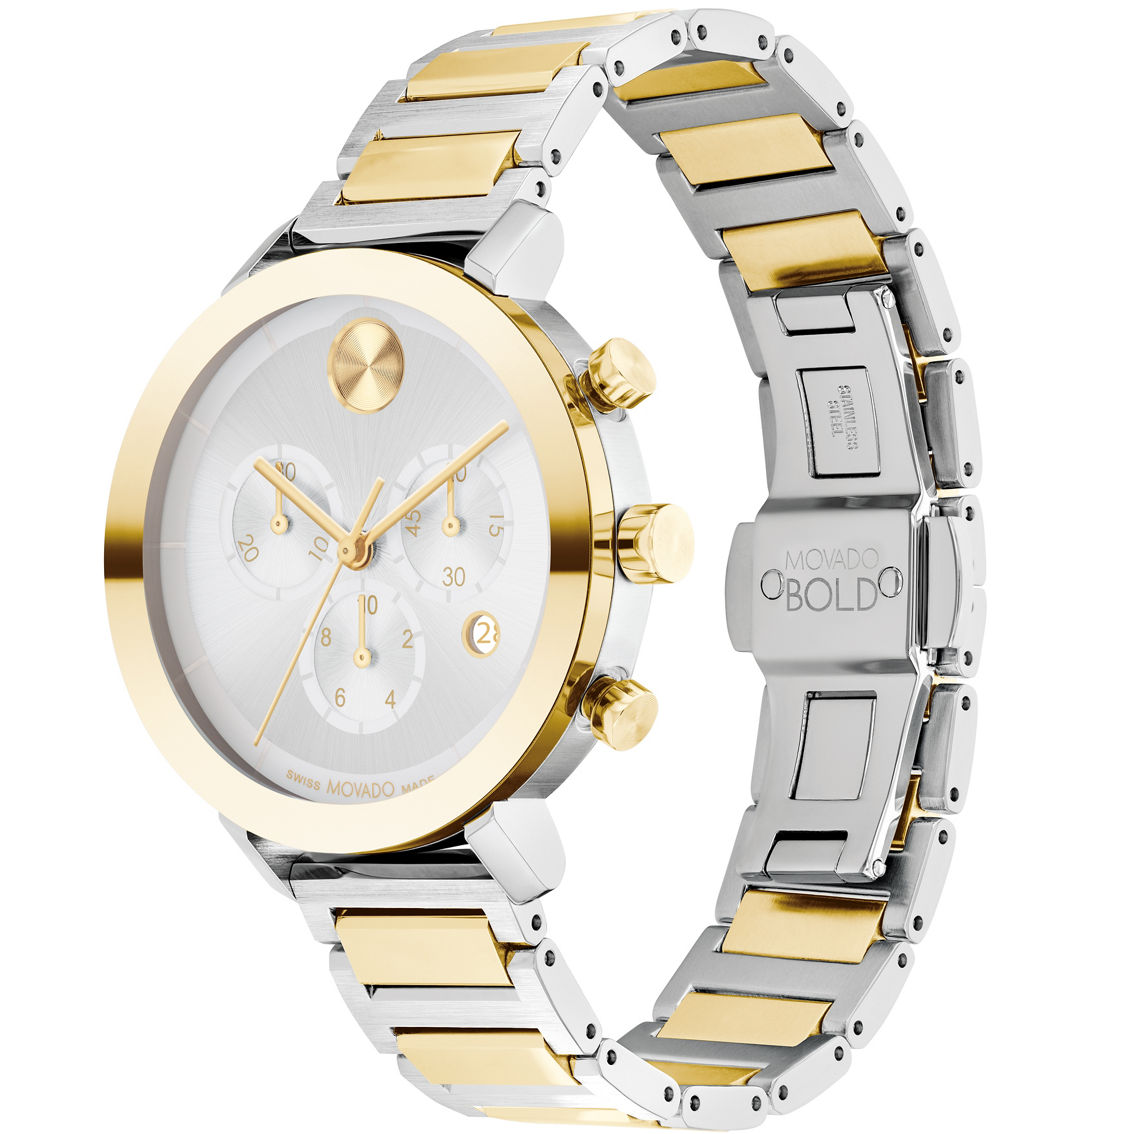 Movado Women's Bold Evolution Two Tone Stainless Steel Watch 3600885 - Image 3 of 3